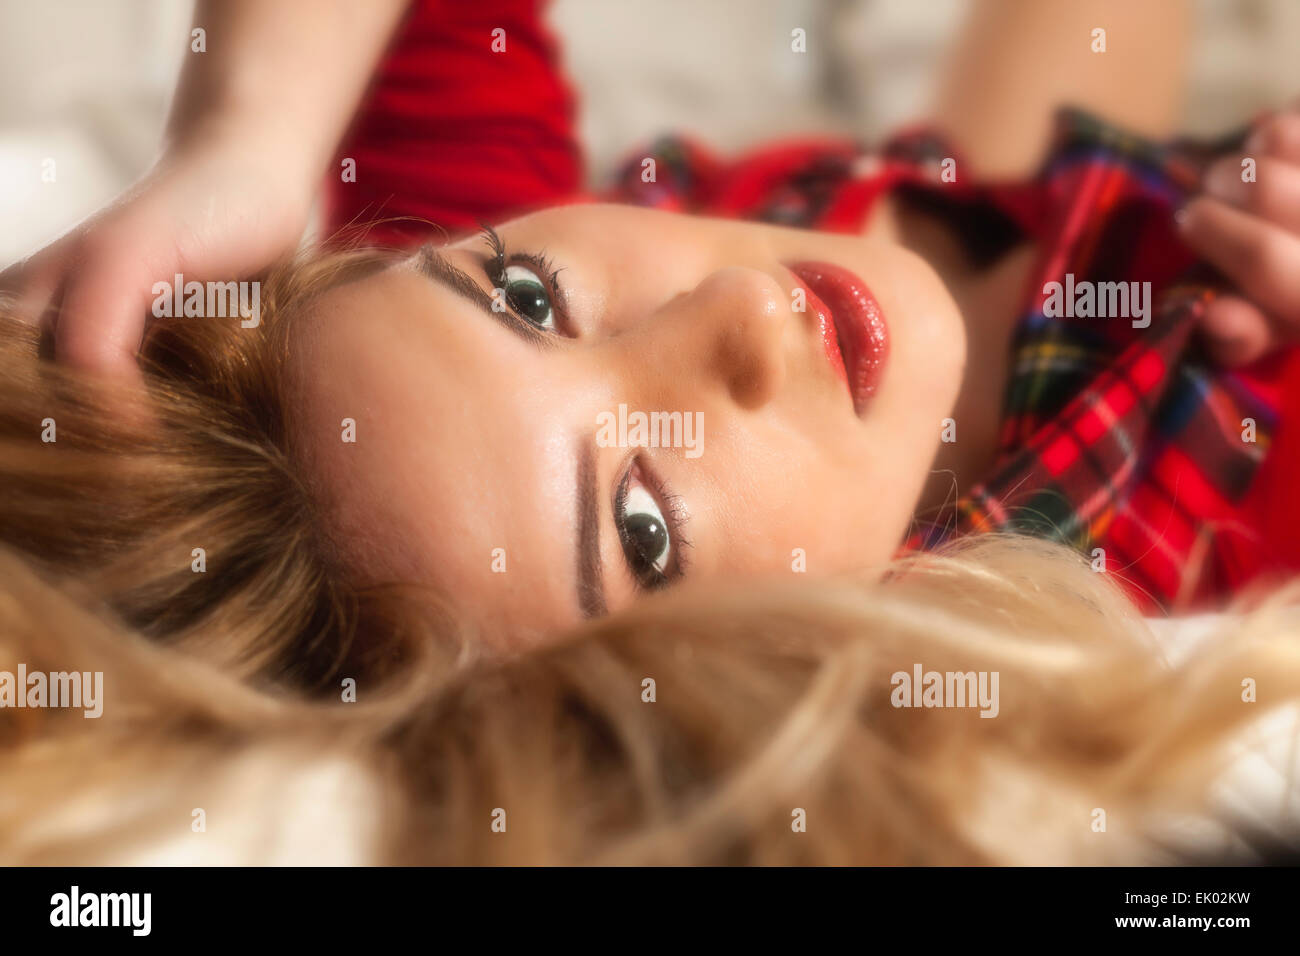 A closeup of a pretty blonde Latina girl with red lipstick laying on bed. Stock Photo